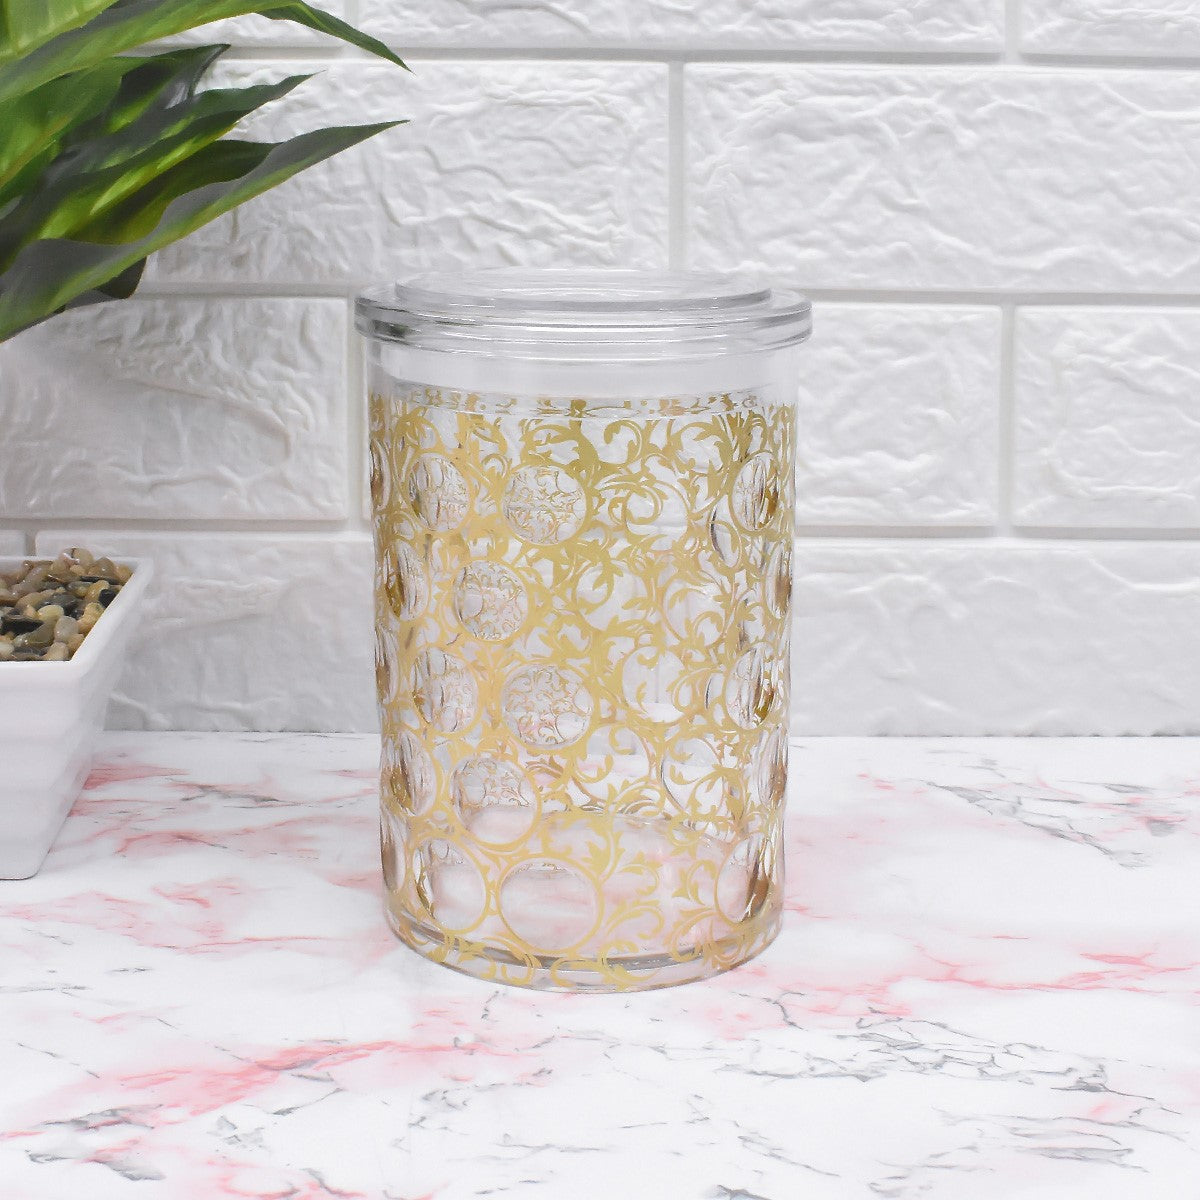 Acrylic Airtight Canister Jar & Container, Round, Gold (4x6.5 in) (8946)